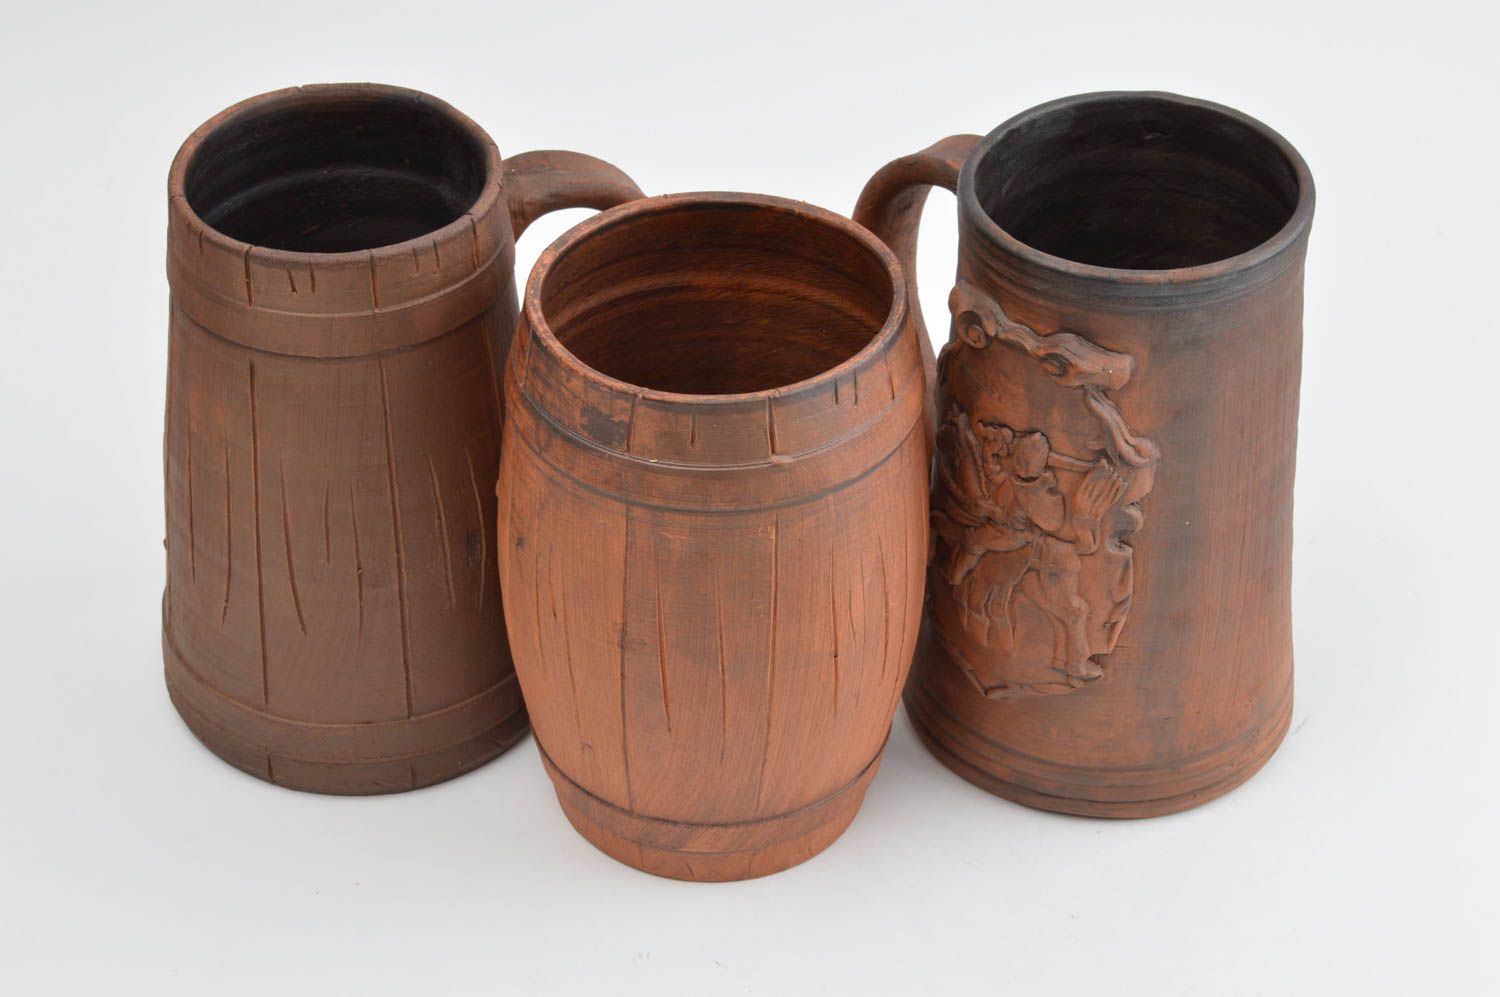 Set of 3 different clay beer mugs in German-style in dark brown color 4,46 lb photo 3